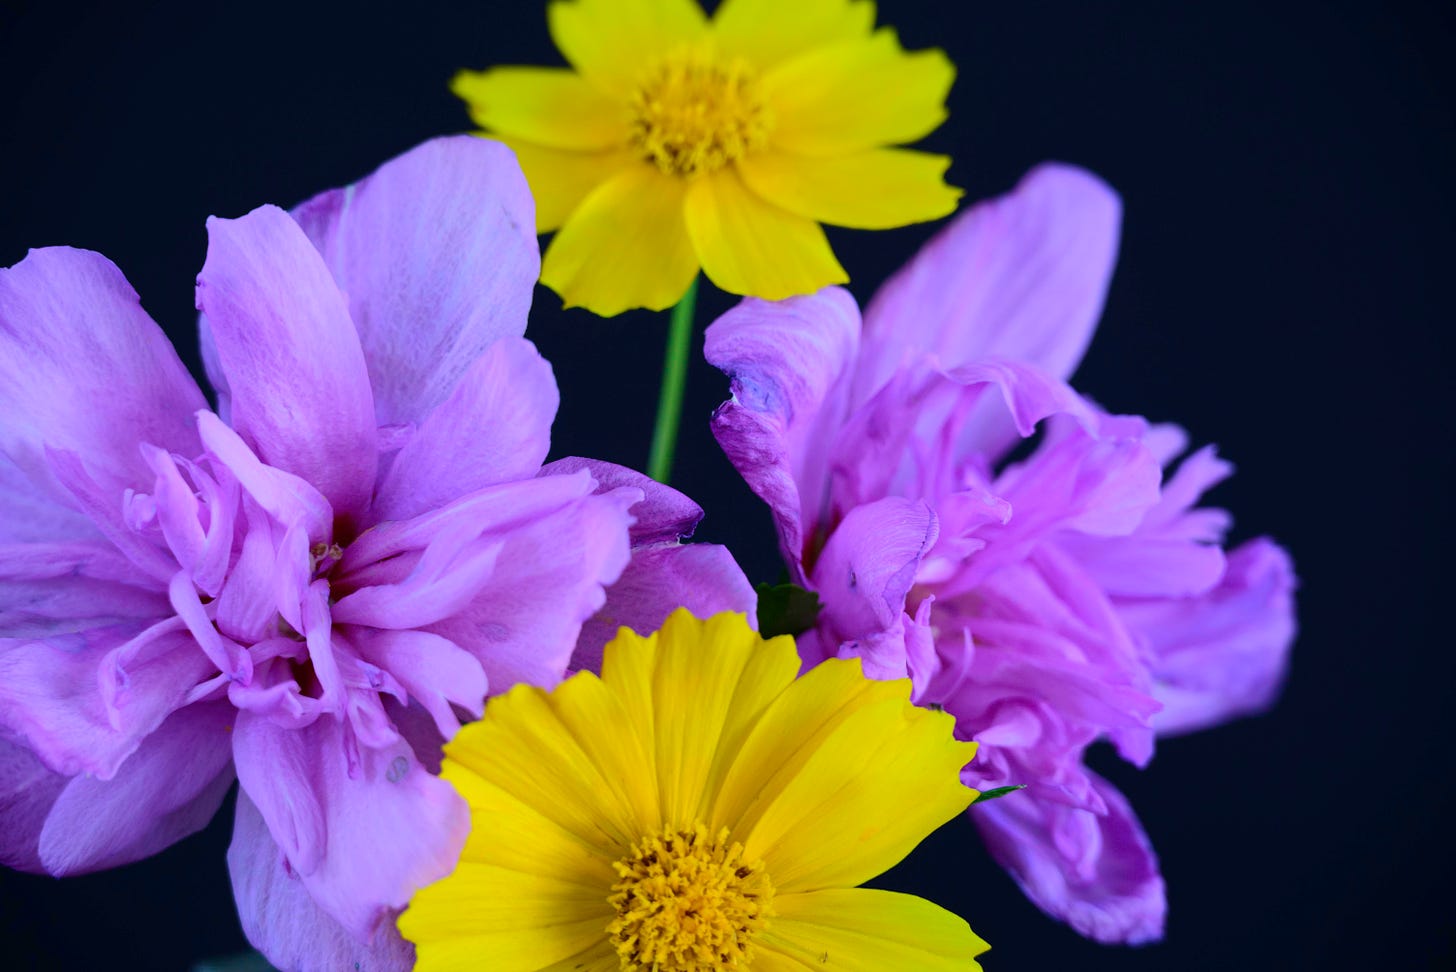 A small bouquet with yellow Coreopsis and purple Althea against a black background.